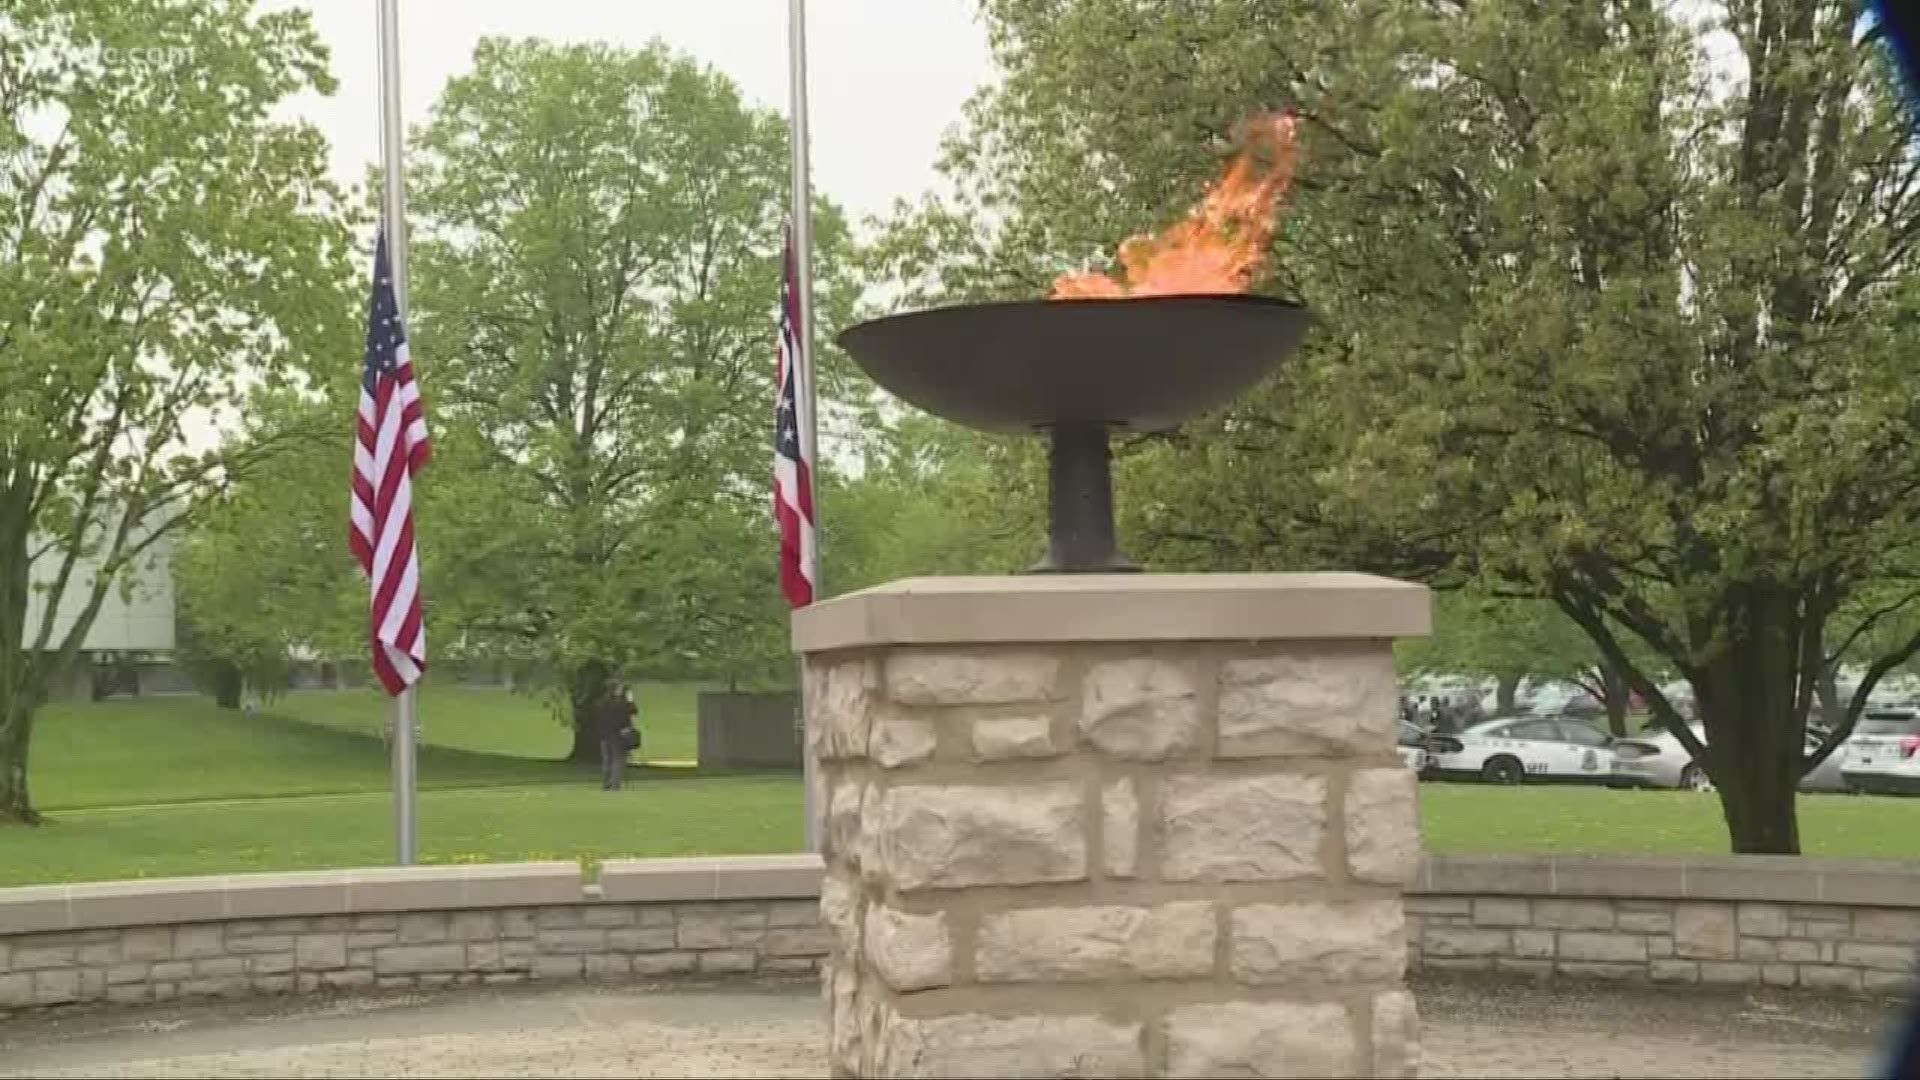 4 officers memorialized, family speaks out